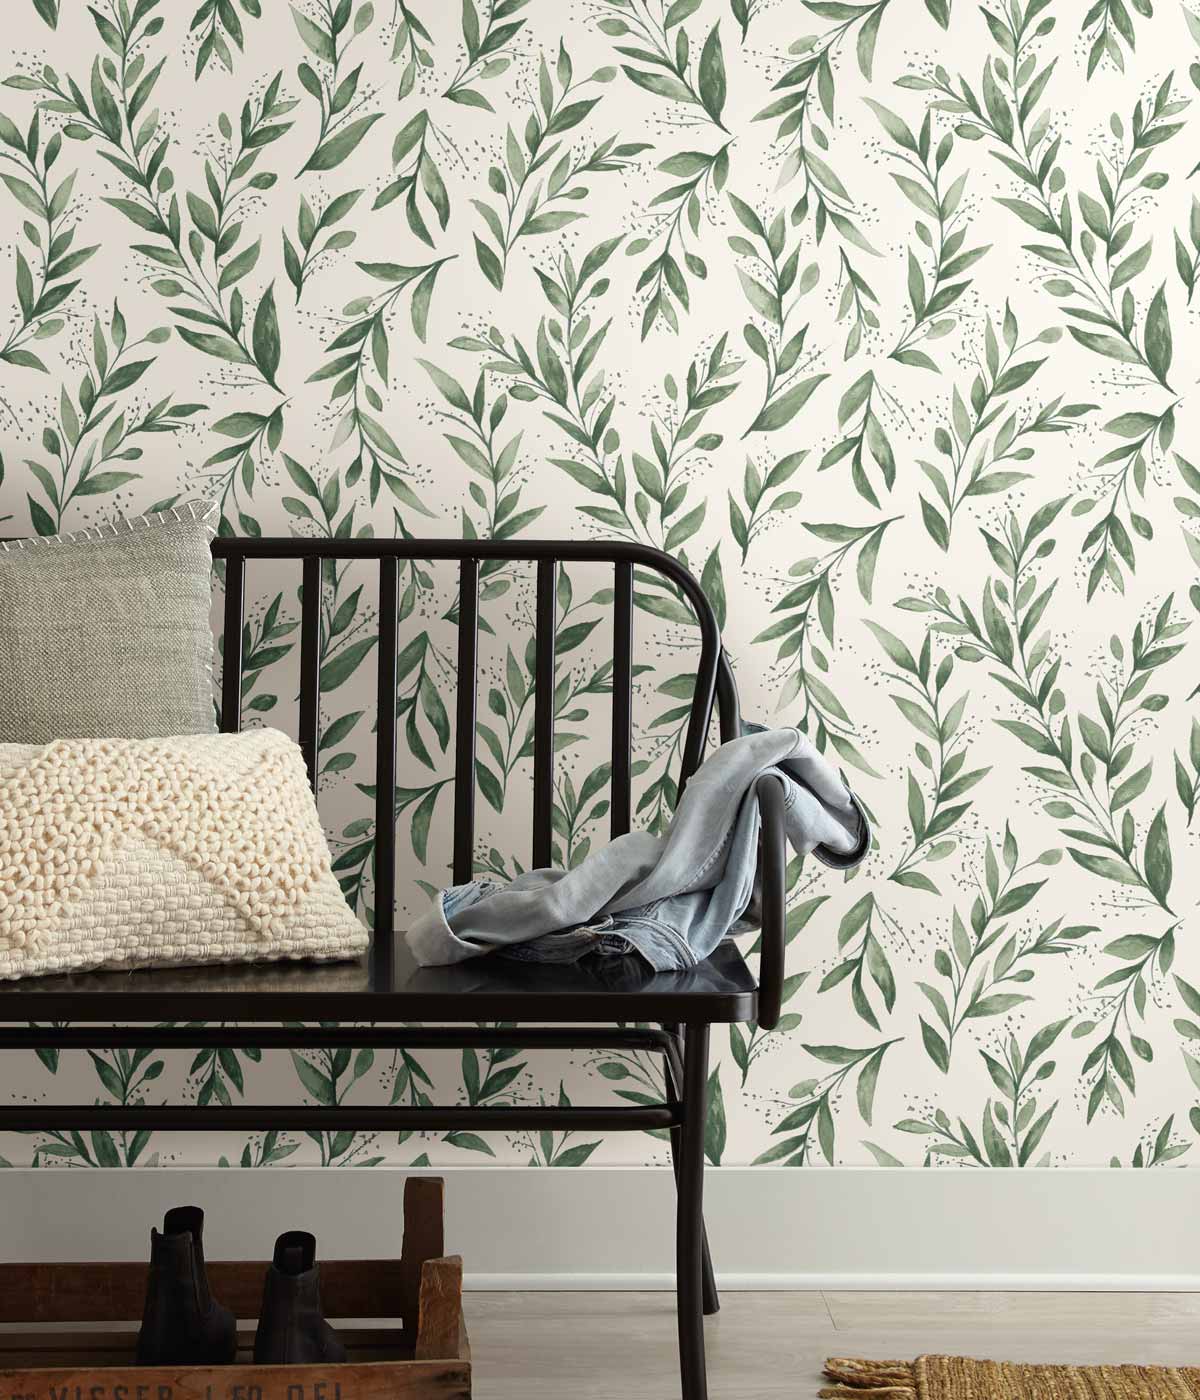 example of traditional wallpaper pattern